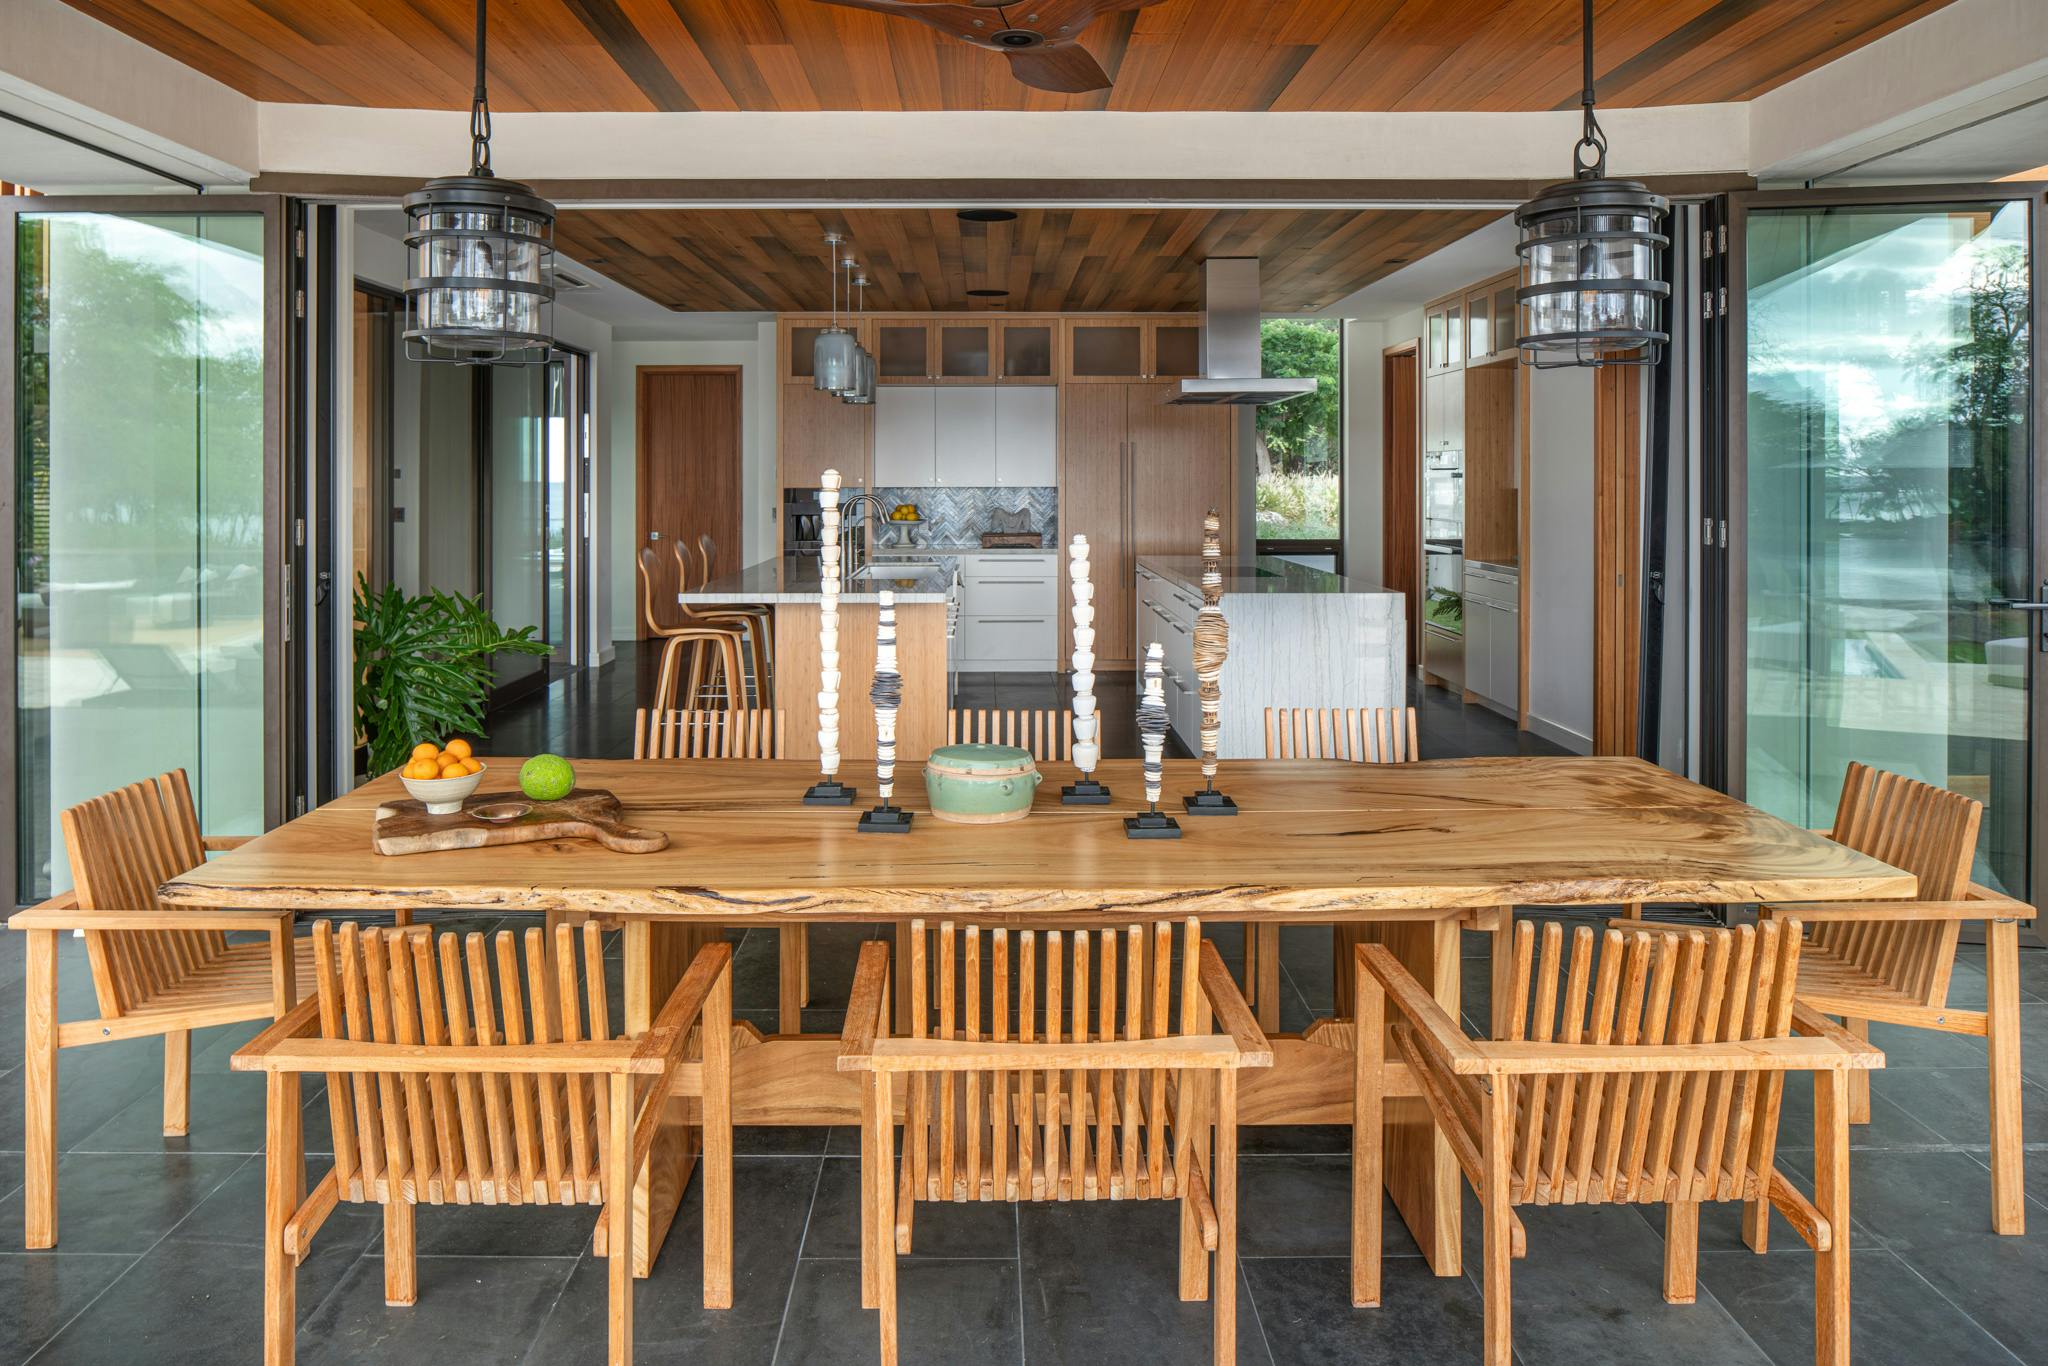 inddor/outdoor dining with NanaWall FoldFlat residential glass walls